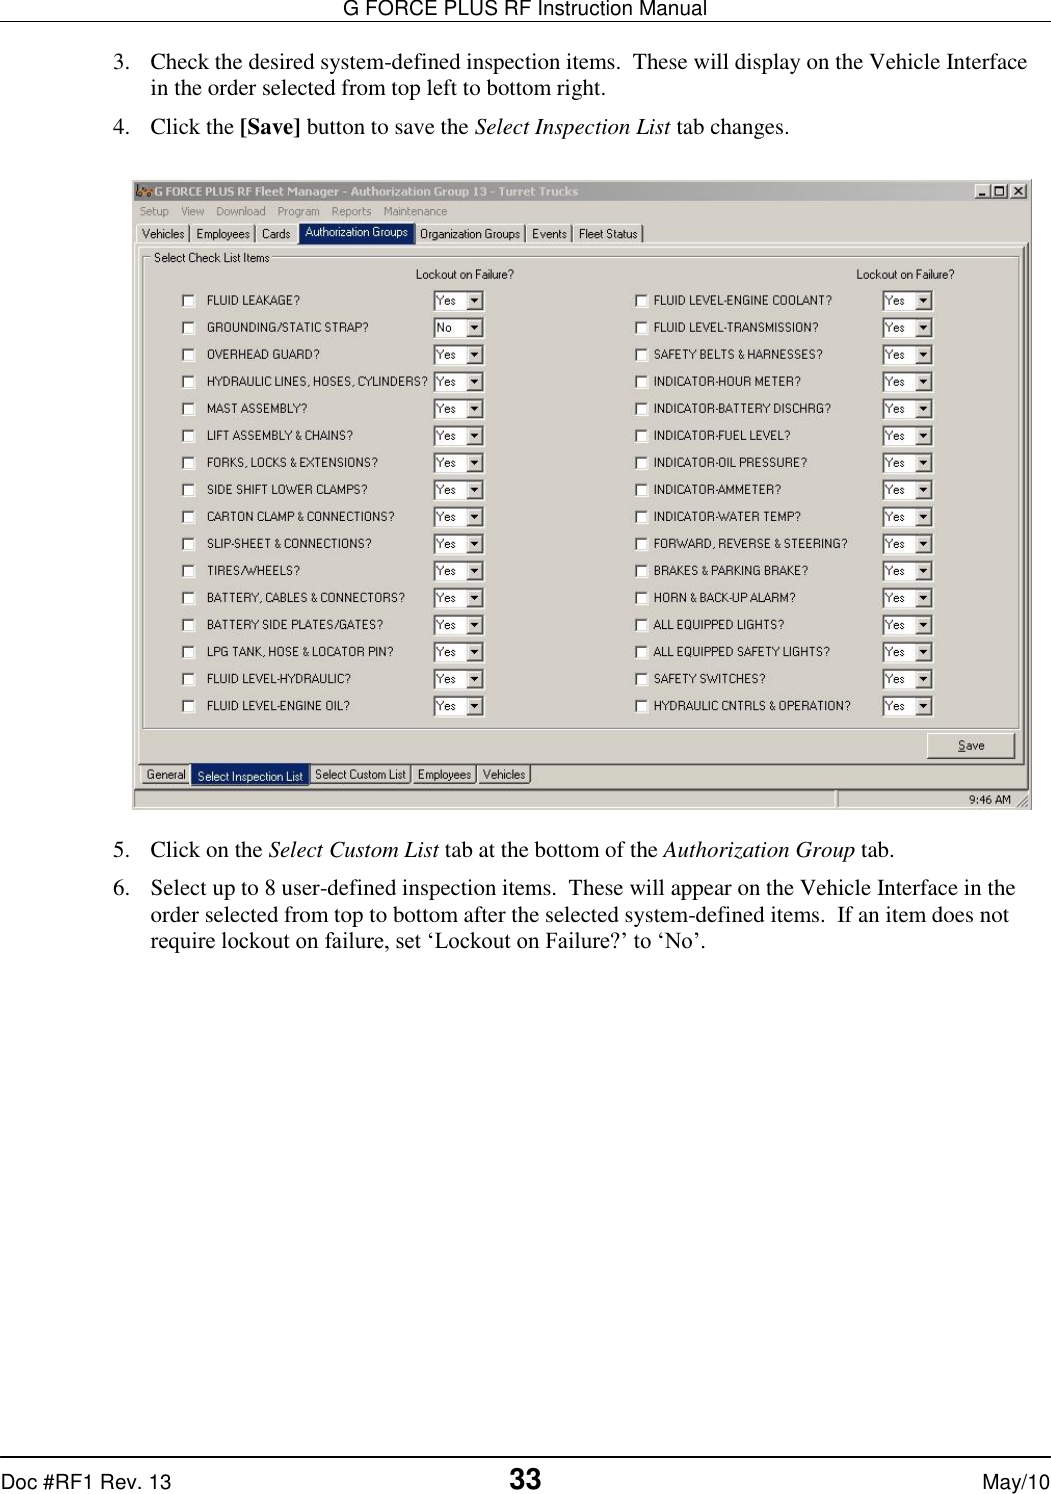 G FORCE PLUS RF Instruction Manual   Doc #RF1 Rev. 13  33 May/10 3. Check the desired system-defined inspection items.  These will display on the Vehicle Interface in the order selected from top left to bottom right. 4. Click the [Save] button to save the Select Inspection List tab changes.    5. Click on the Select Custom List tab at the bottom of the Authorization Group tab. 6. Select up to 8 user-defined inspection items.  These will appear on the Vehicle Interface in the order selected from top to bottom after the selected system-defined items.  If an item does not require lockout on failure, set ‘Lockout on Failure?’ to ‘No’. 